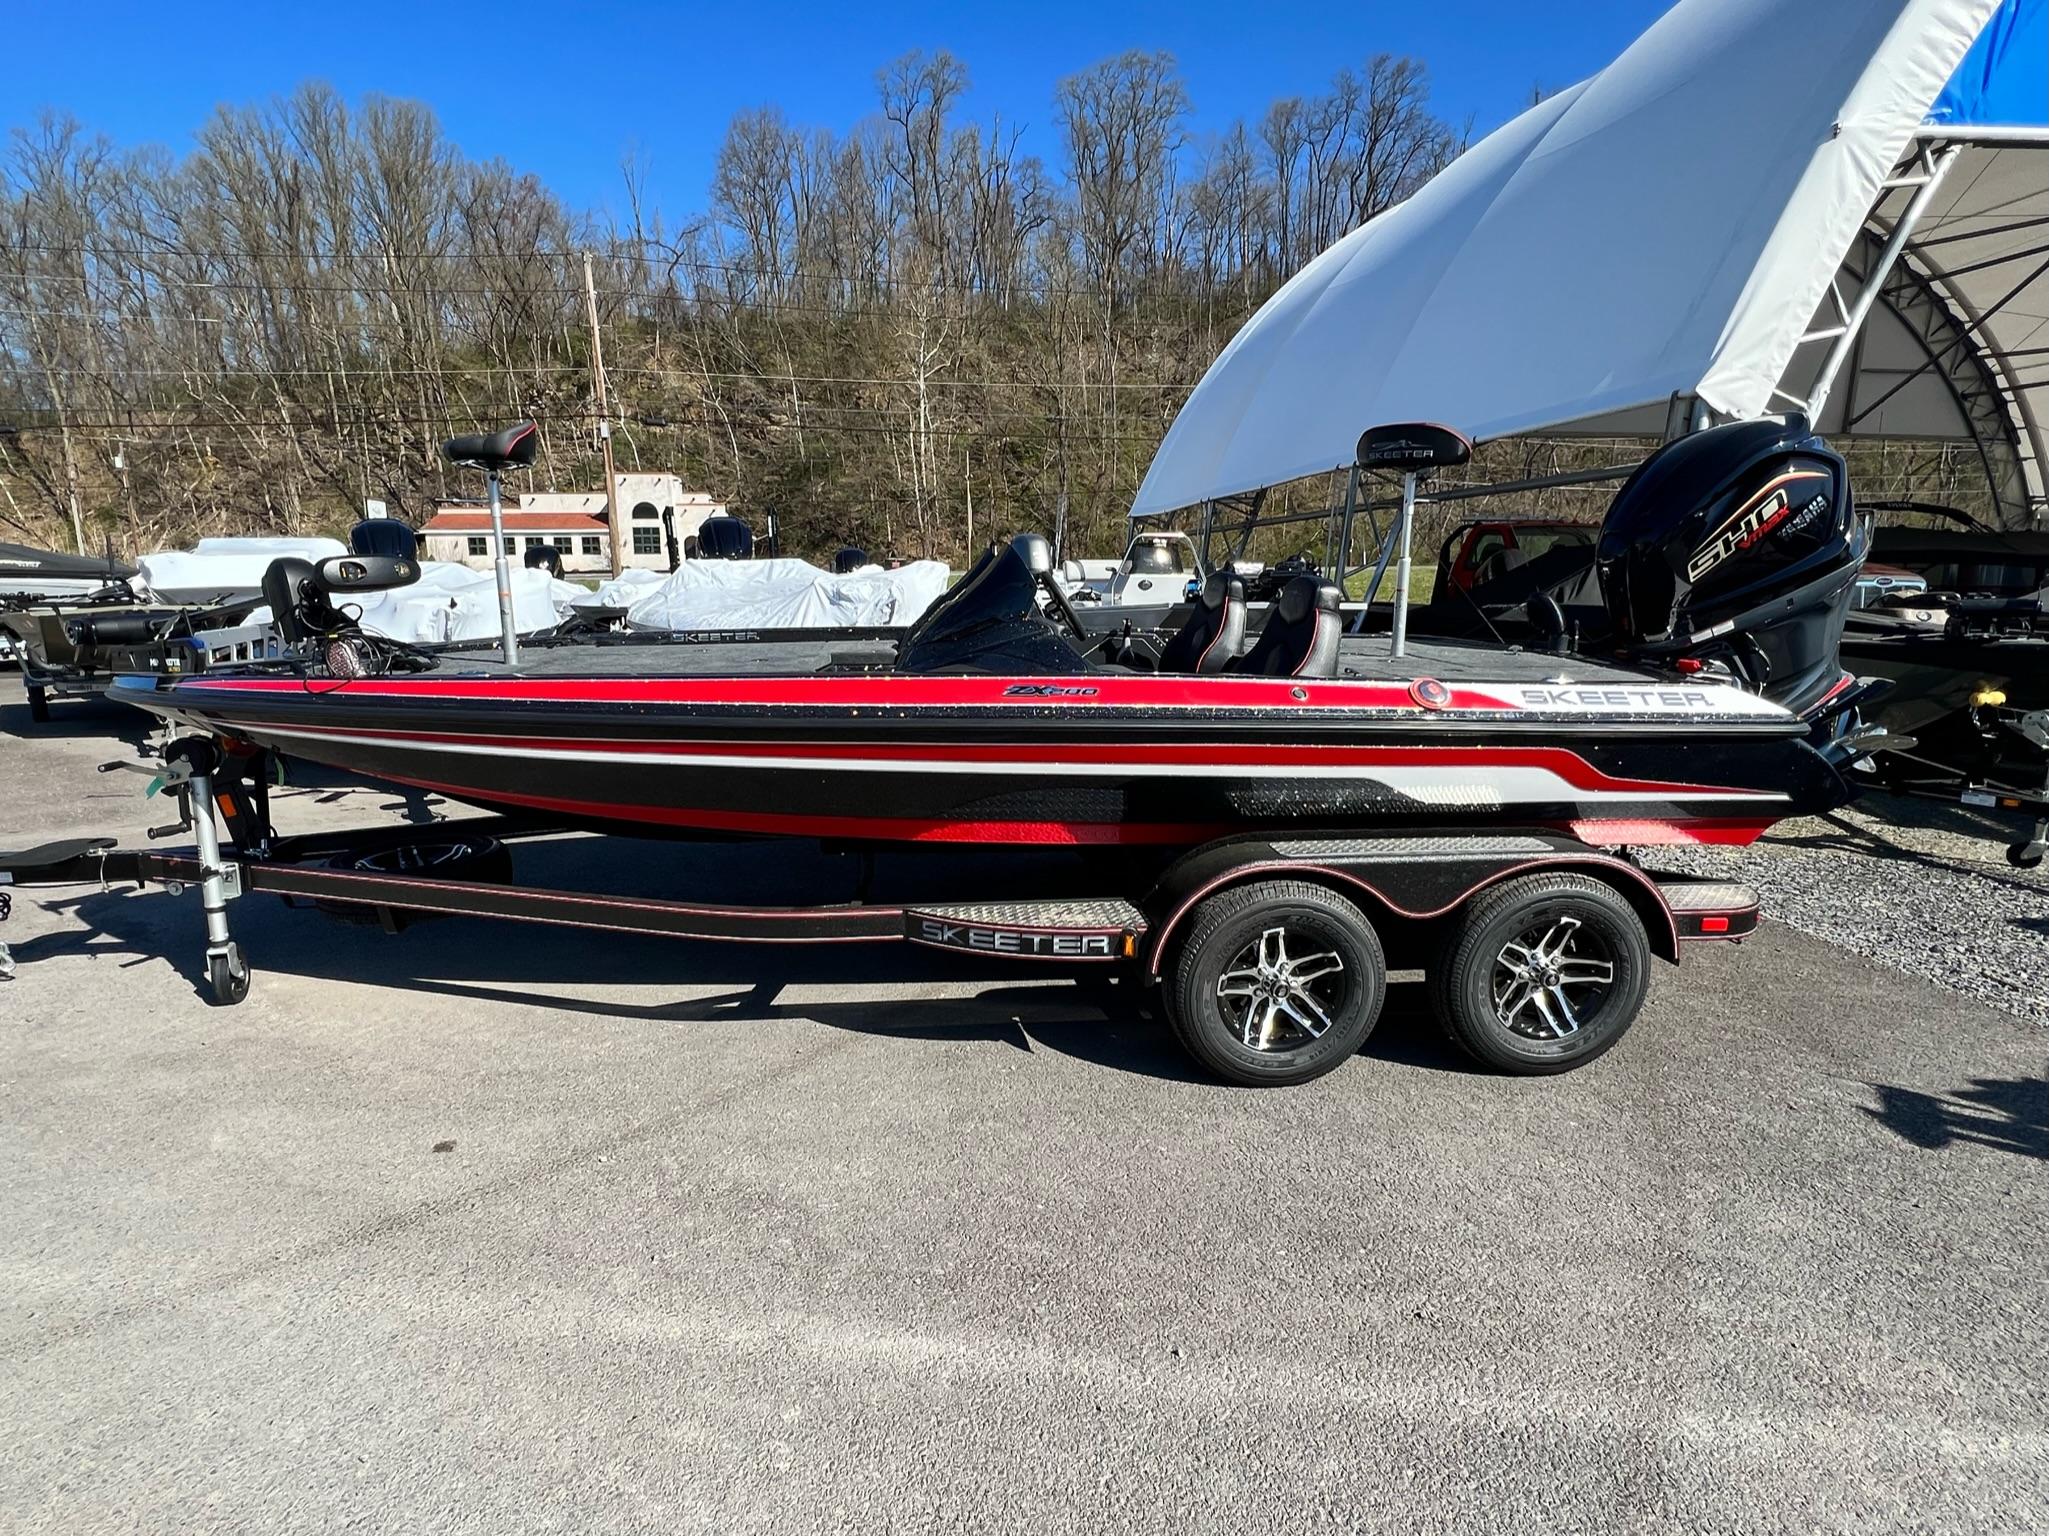 Skeeter 200 Zx boats for sale in United States - boats.com